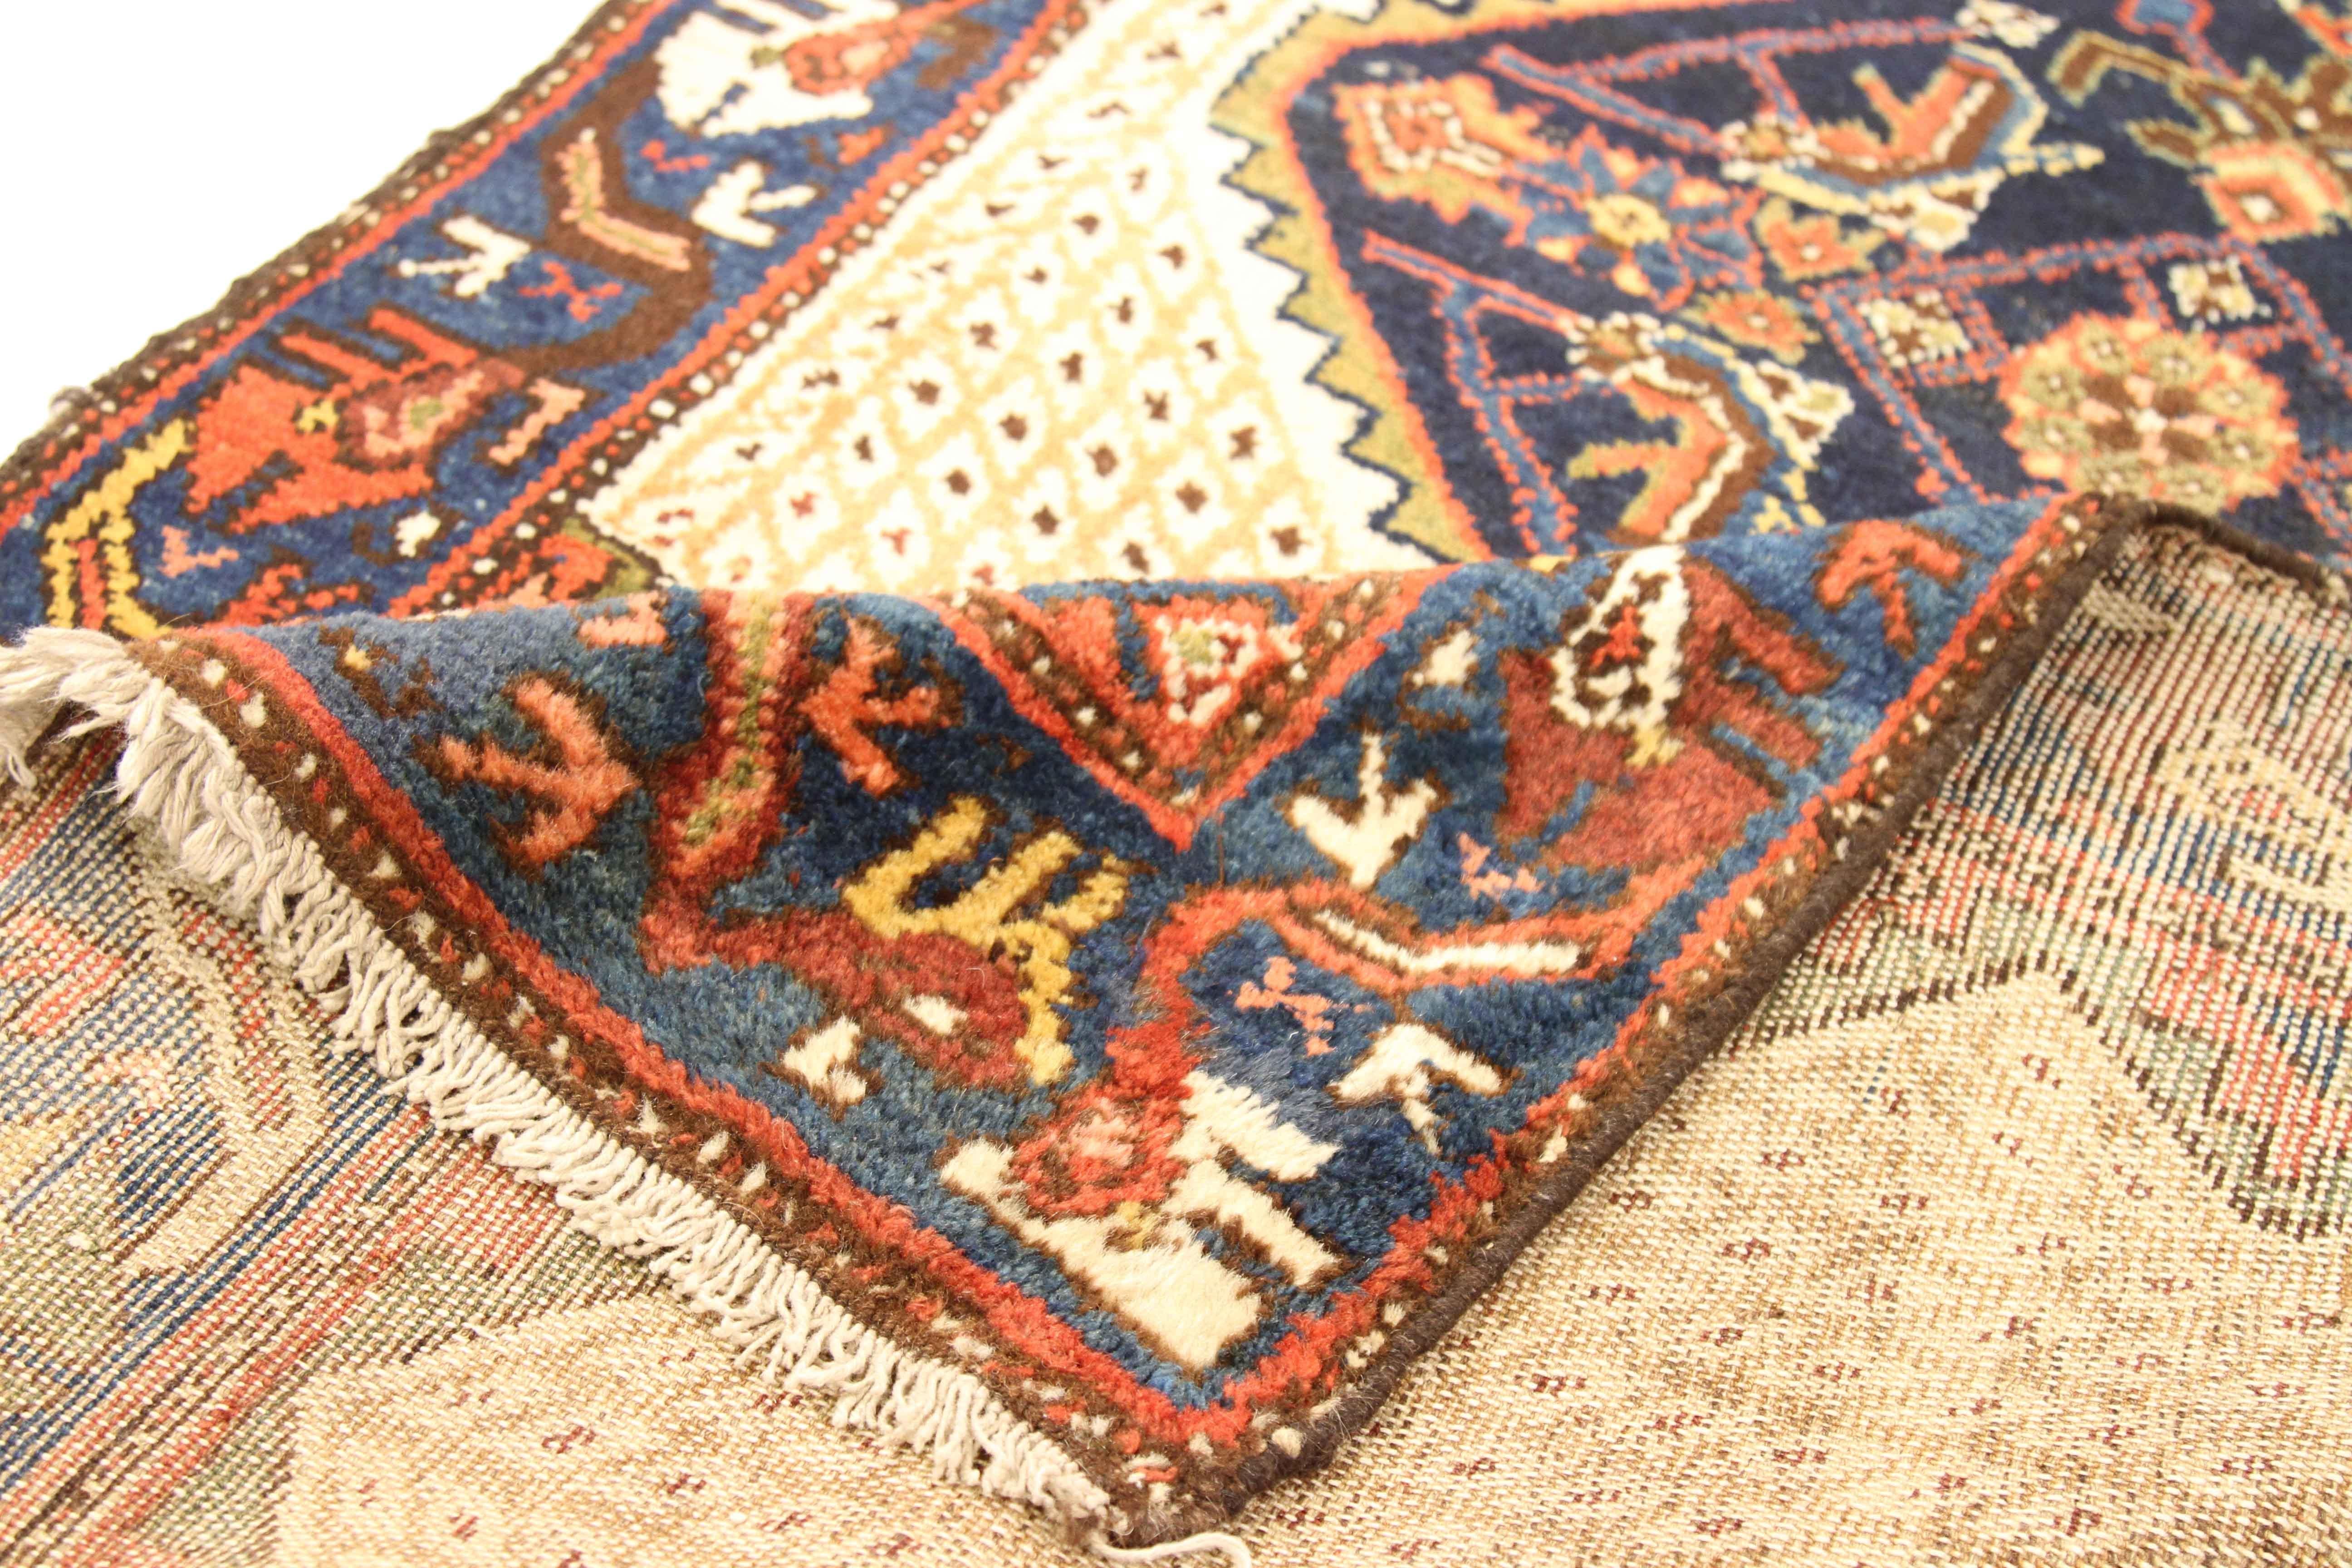 Made of the finest wool and vegetable dyes, this antique Persian rug follows a design made popular by weavers in the ancient Persian city of Malayer. Tribal patterns infused with nature elements became the trademark for Malayers just like this